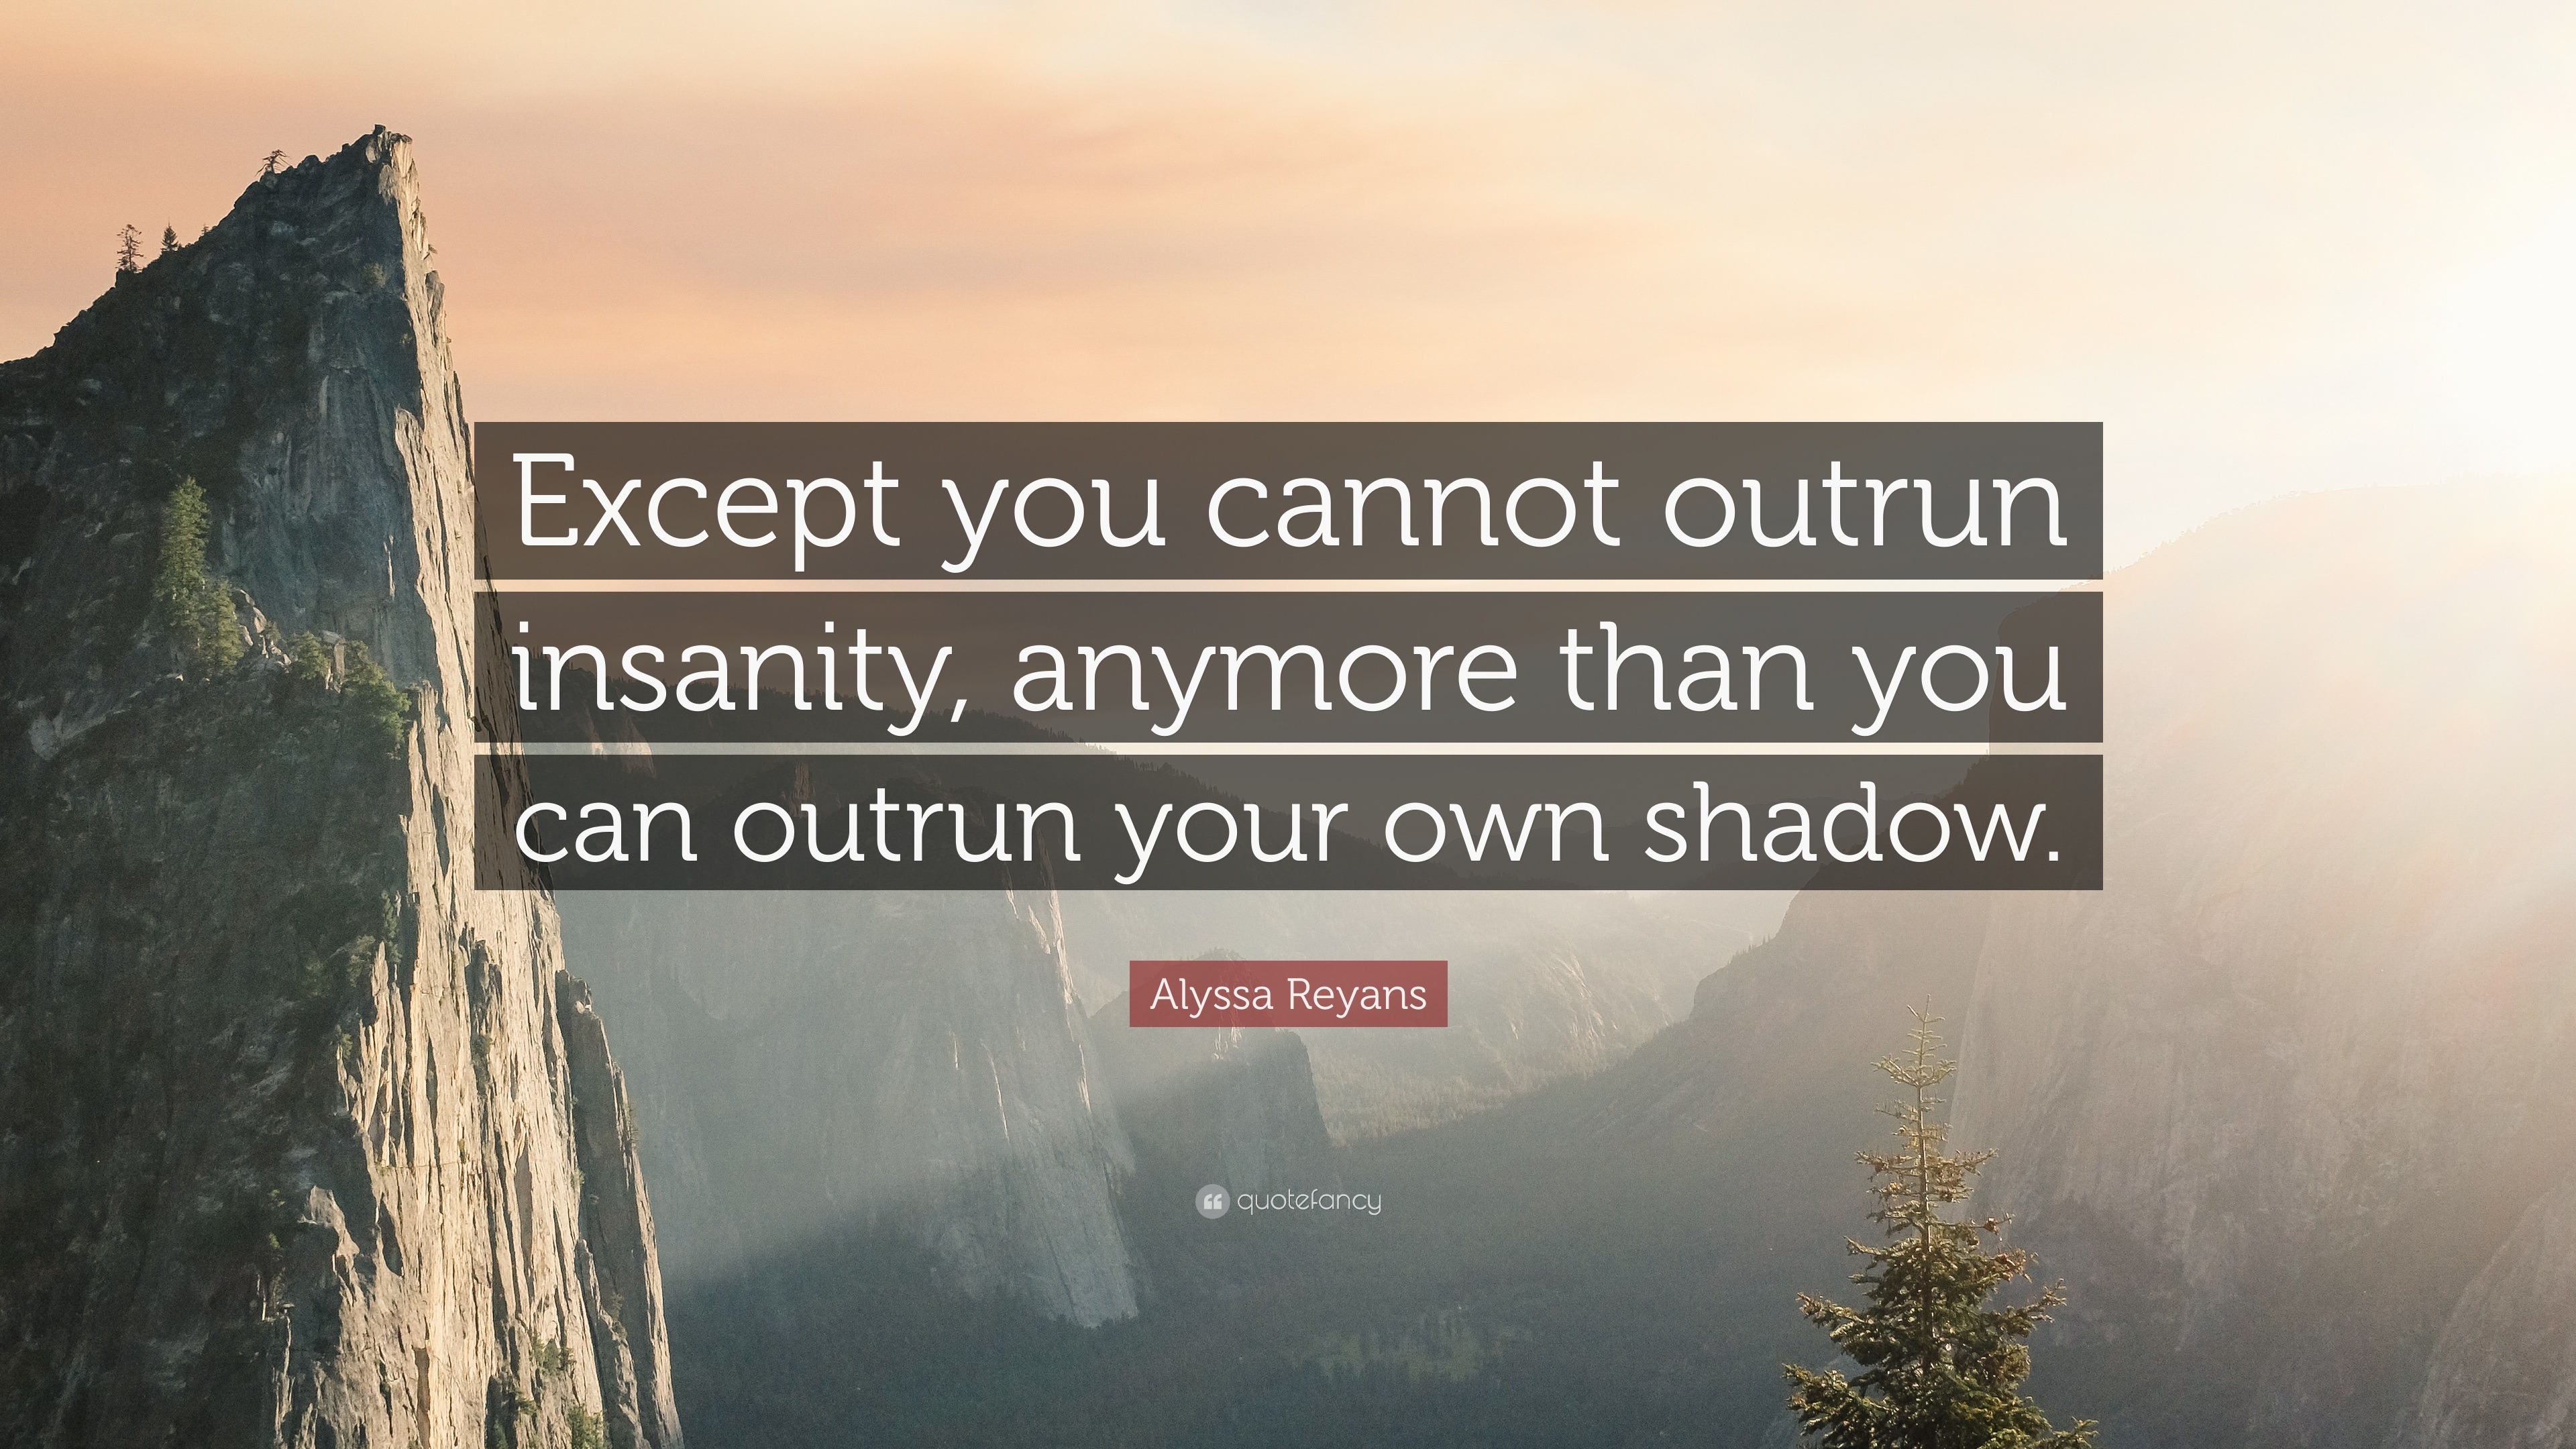 Alyssa Reyans Quote Except You Cannot Outrun Insanity Anymore Images, Photos, Reviews